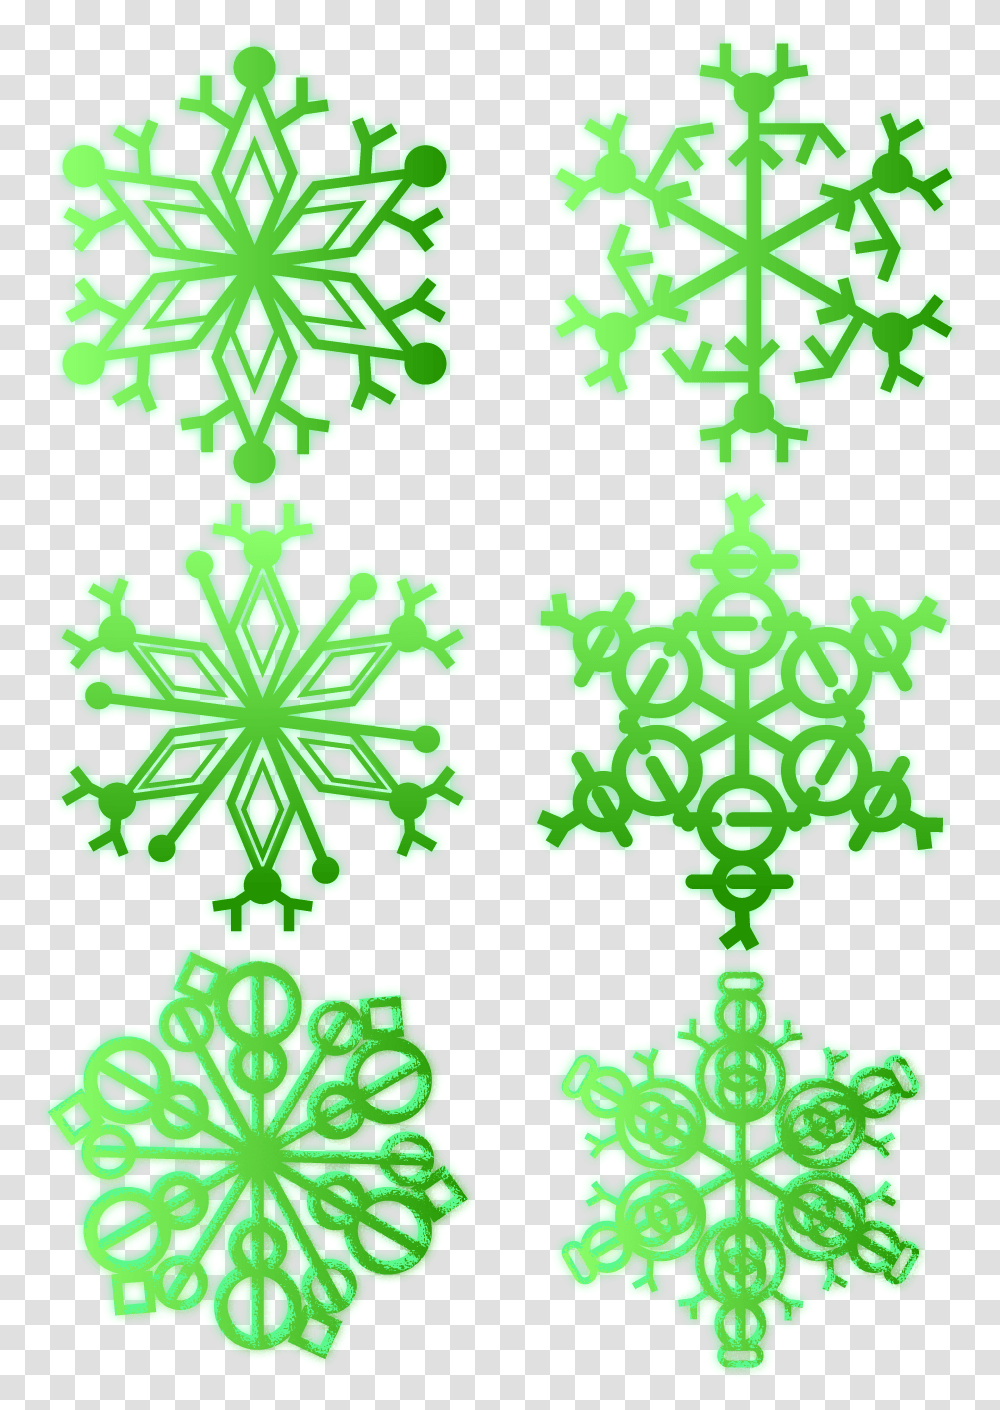 Green Snowflake Glow Fresh And Vector Image, Ornament, Pattern, Cross Transparent Png